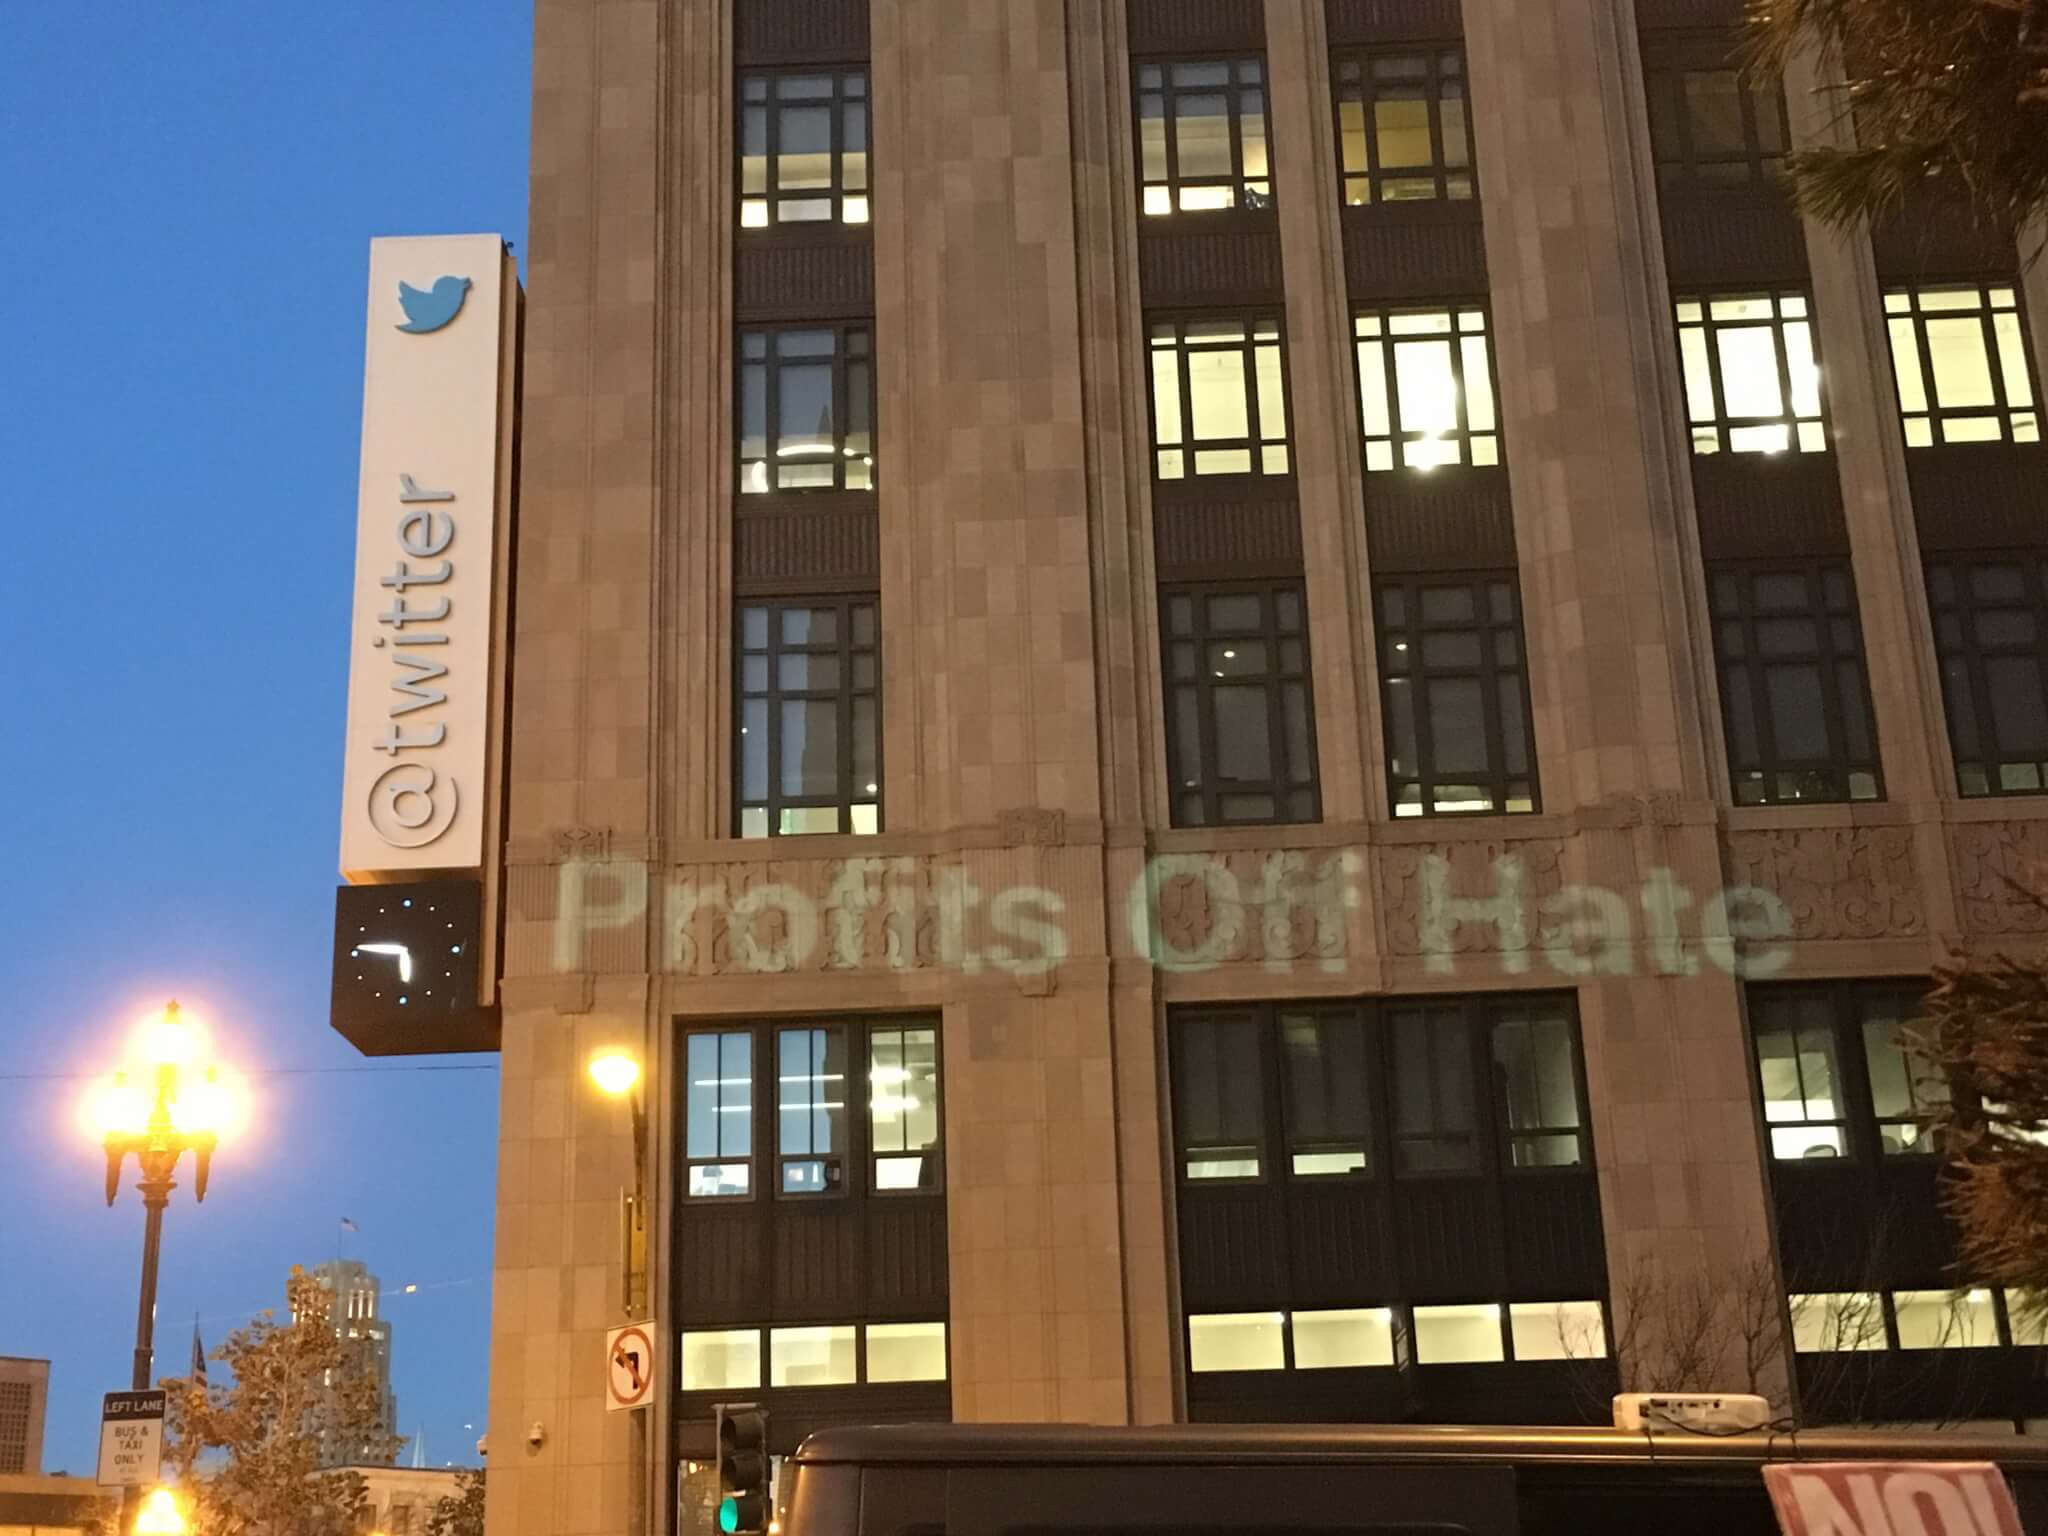 Activists protesting in front of Twitter project message saying that the company profits off of the hate expressed by Trump.